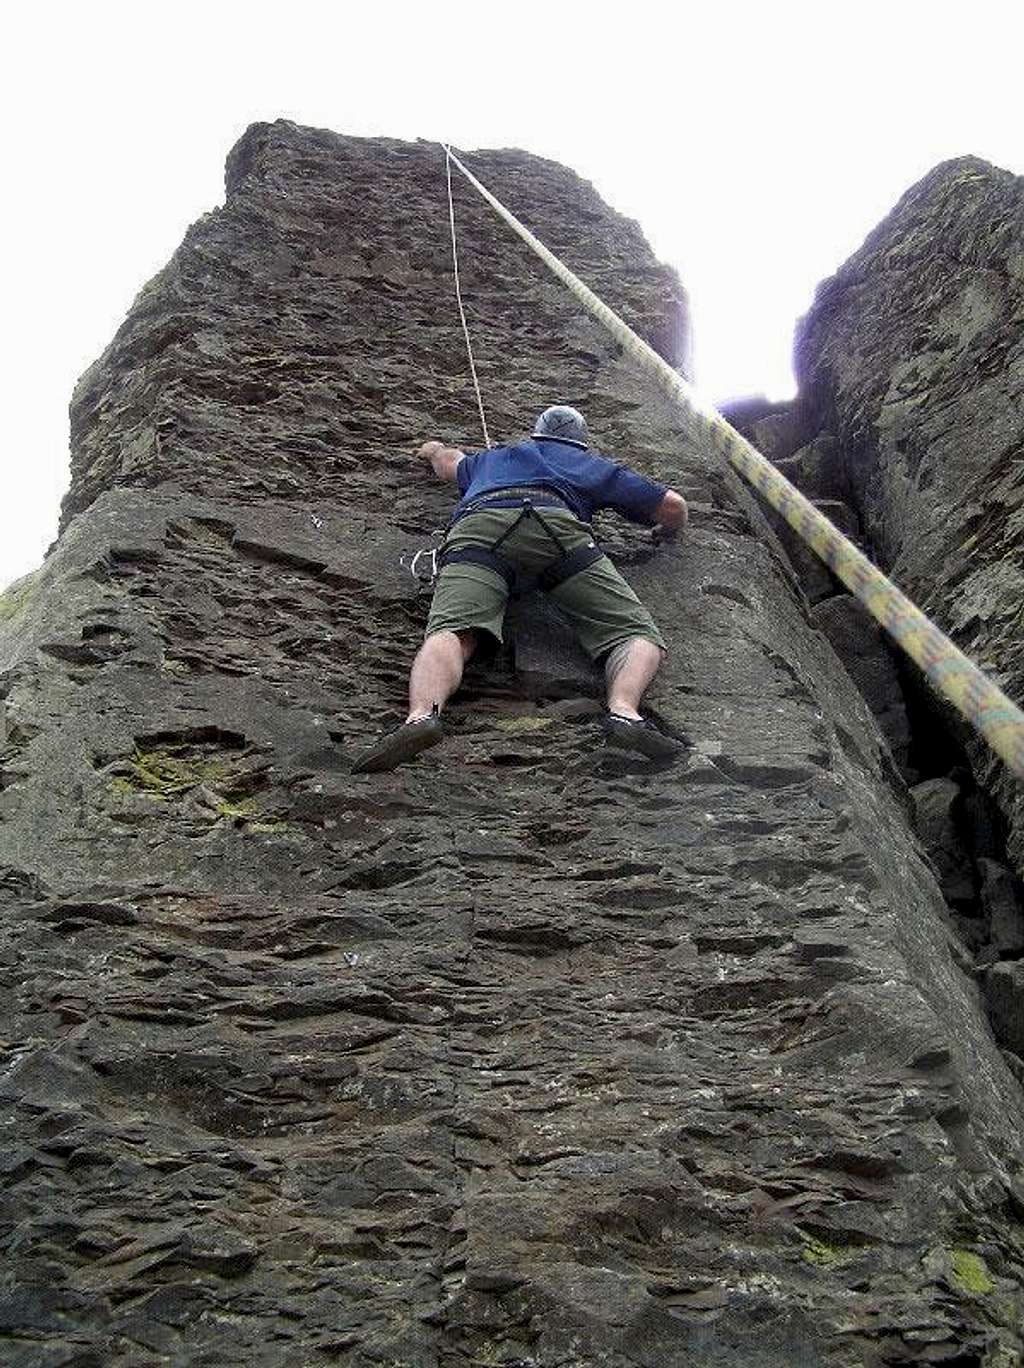 Ludo on The Beckey Route (5.7)